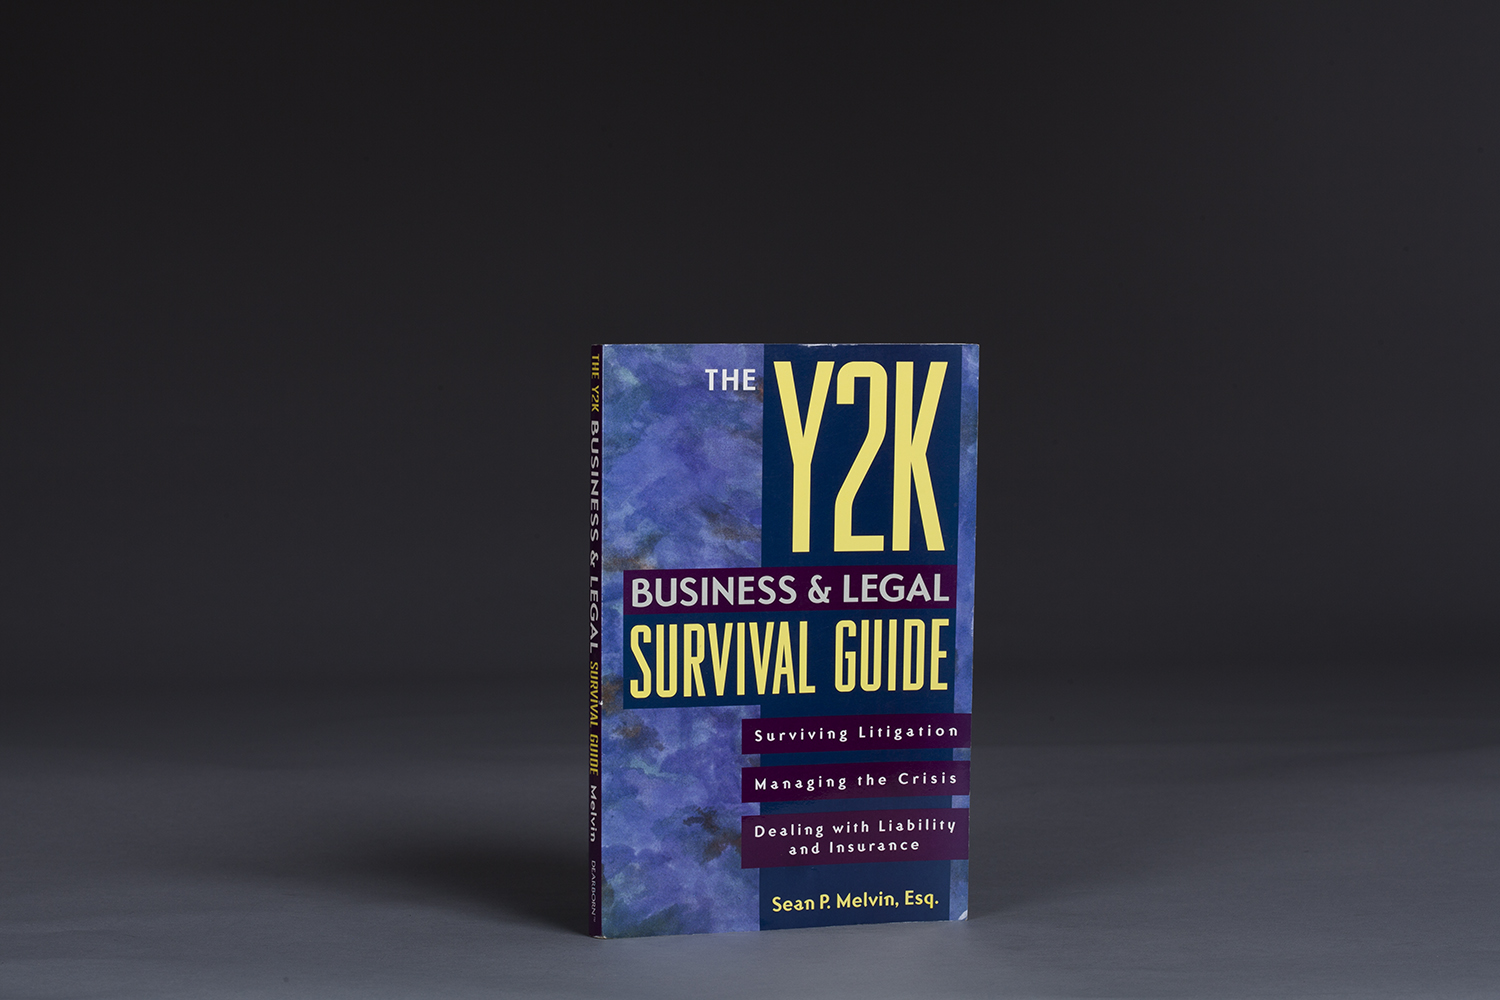 The Y2K Business & Legal Survival Guide - 0233 Cover.jpg